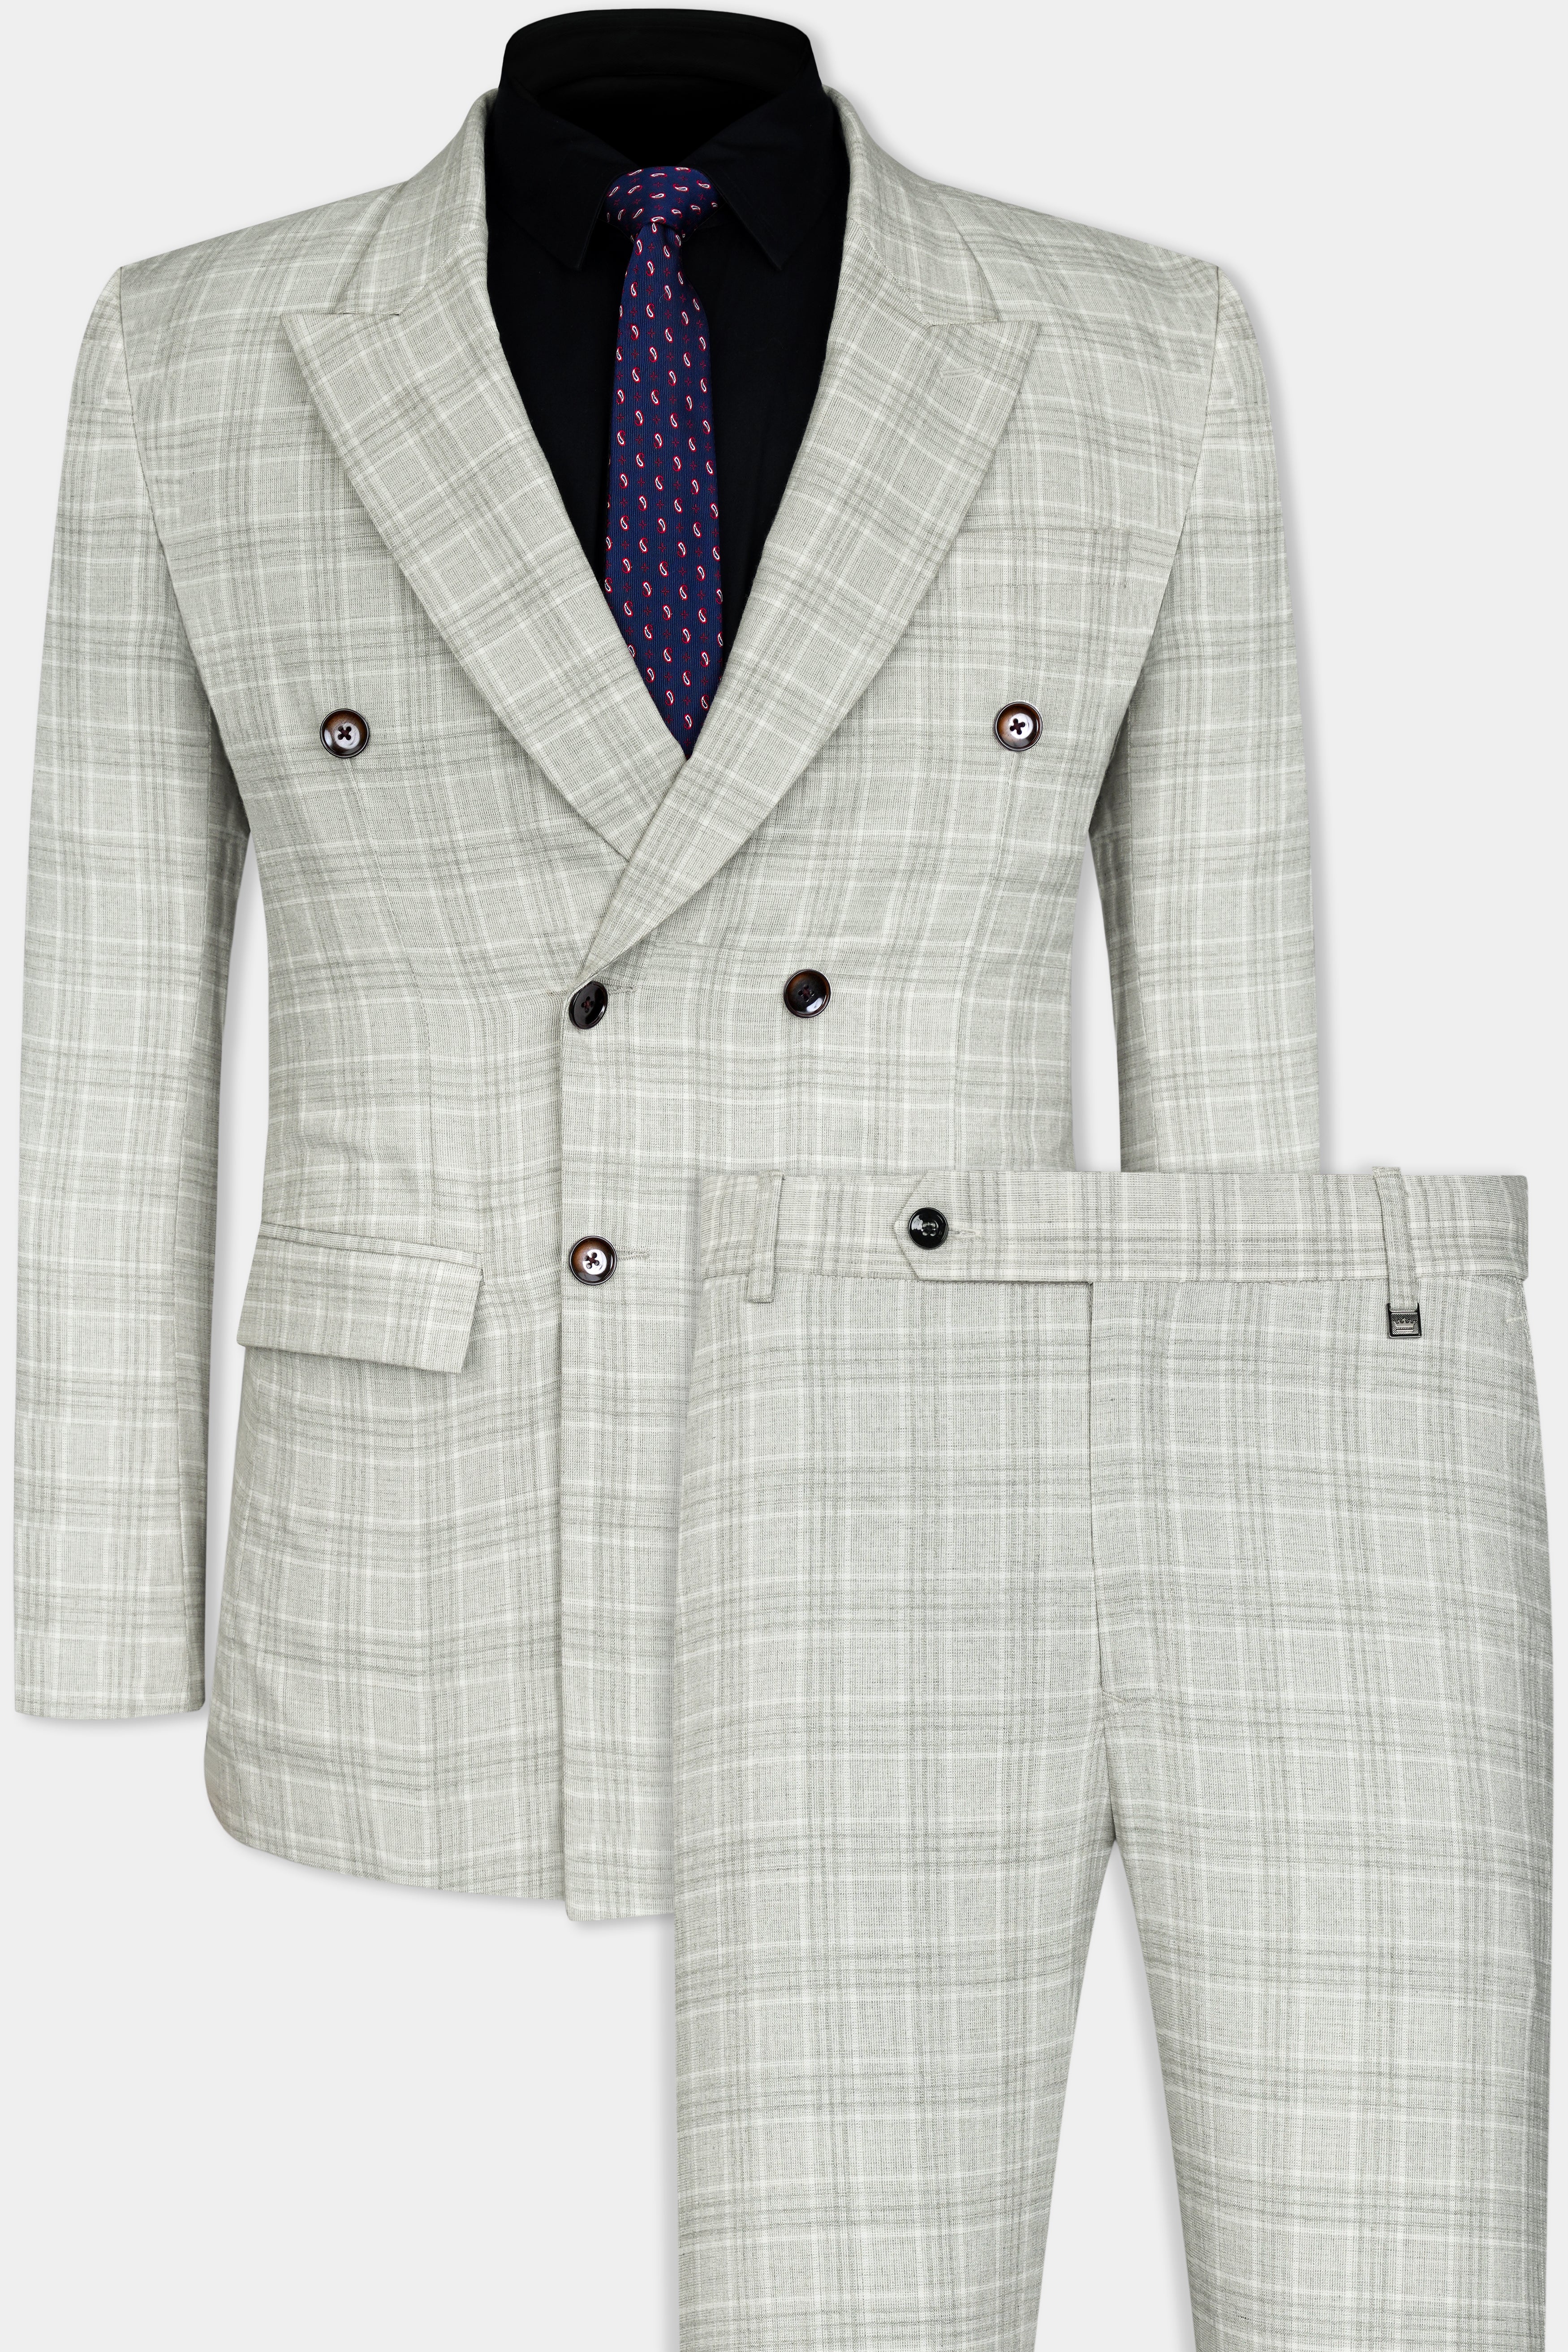 Cloud Gray Plaid Wool Rich Double Breasted Suit ST3109-DB-36, ST3109-DB-38, ST3109-DB-40, ST3109-DB-42, ST3109-DB-44, ST3109-DB-46, ST3109-DB-48, ST3109-DB-50, ST3109-DB-52, ST3109-DB-54, ST3109-DB-56, ST3109-DB-58, ST3109-DB-60